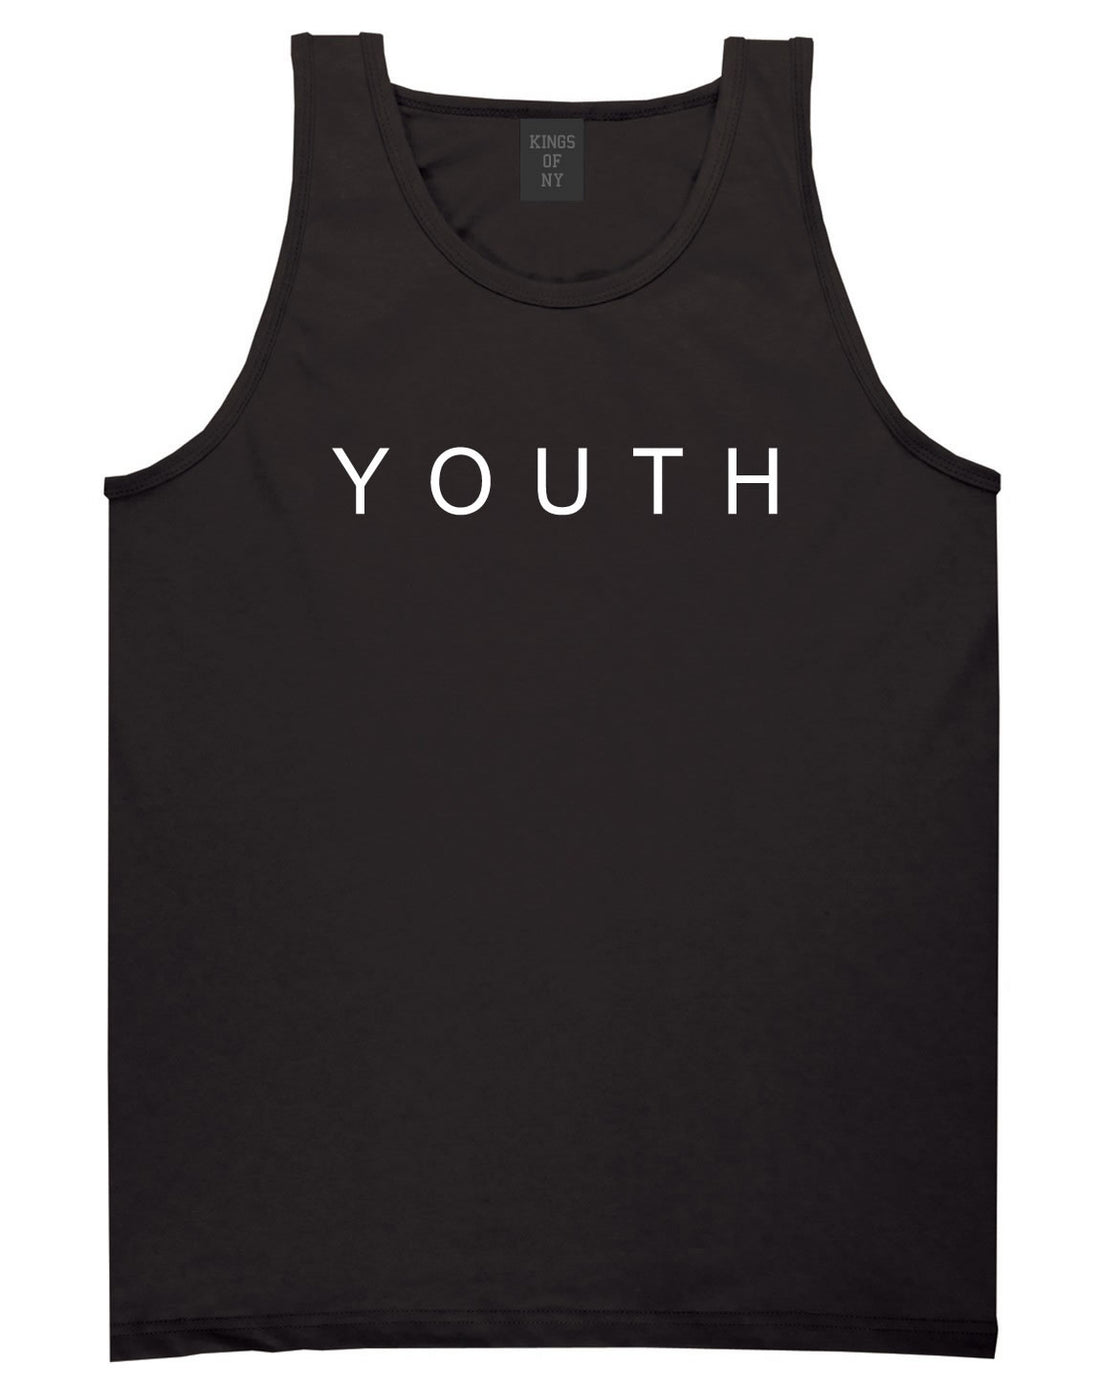 YOUTH Tank Top